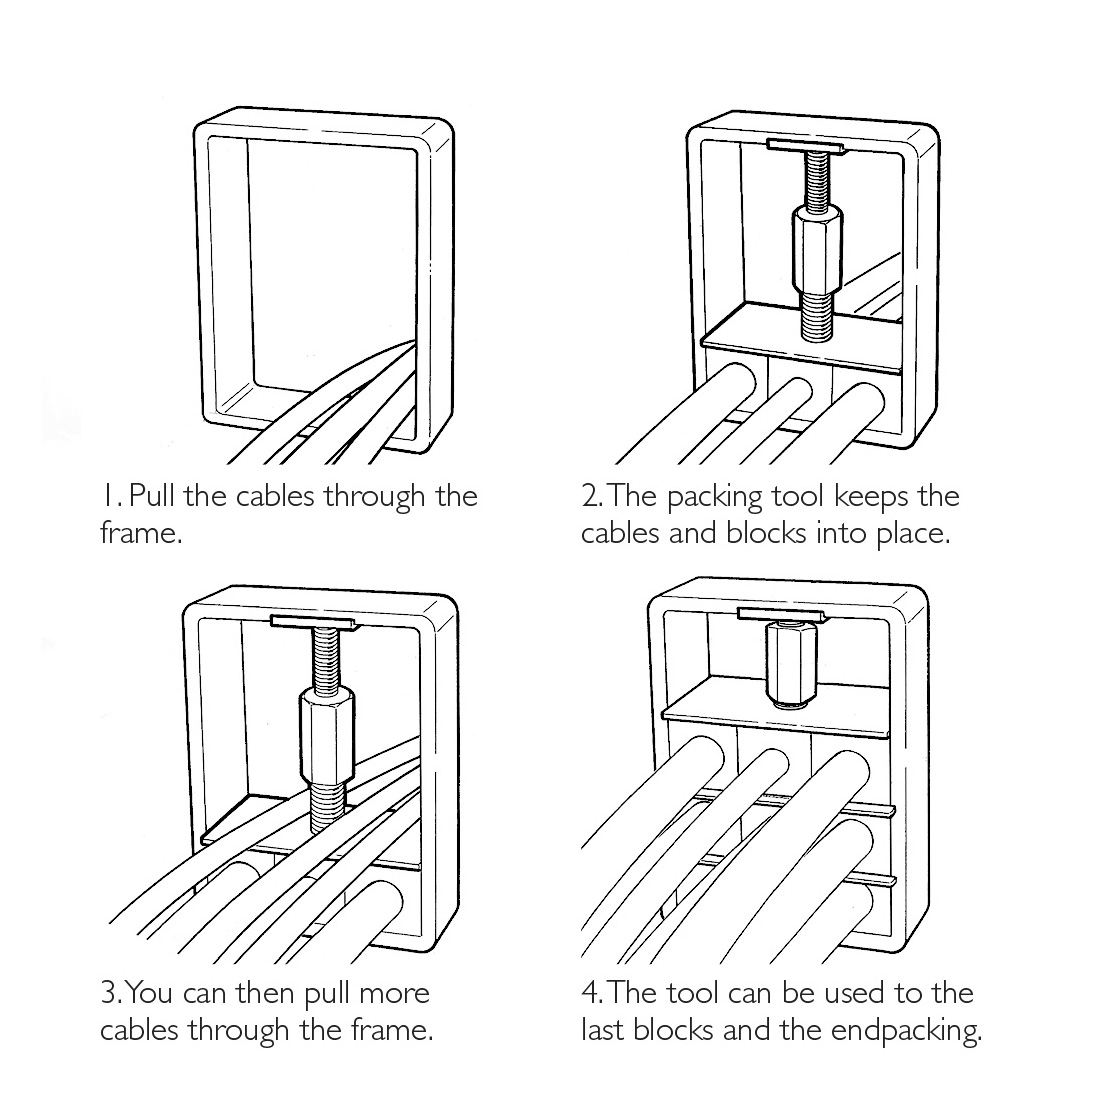 Instructions packing tool